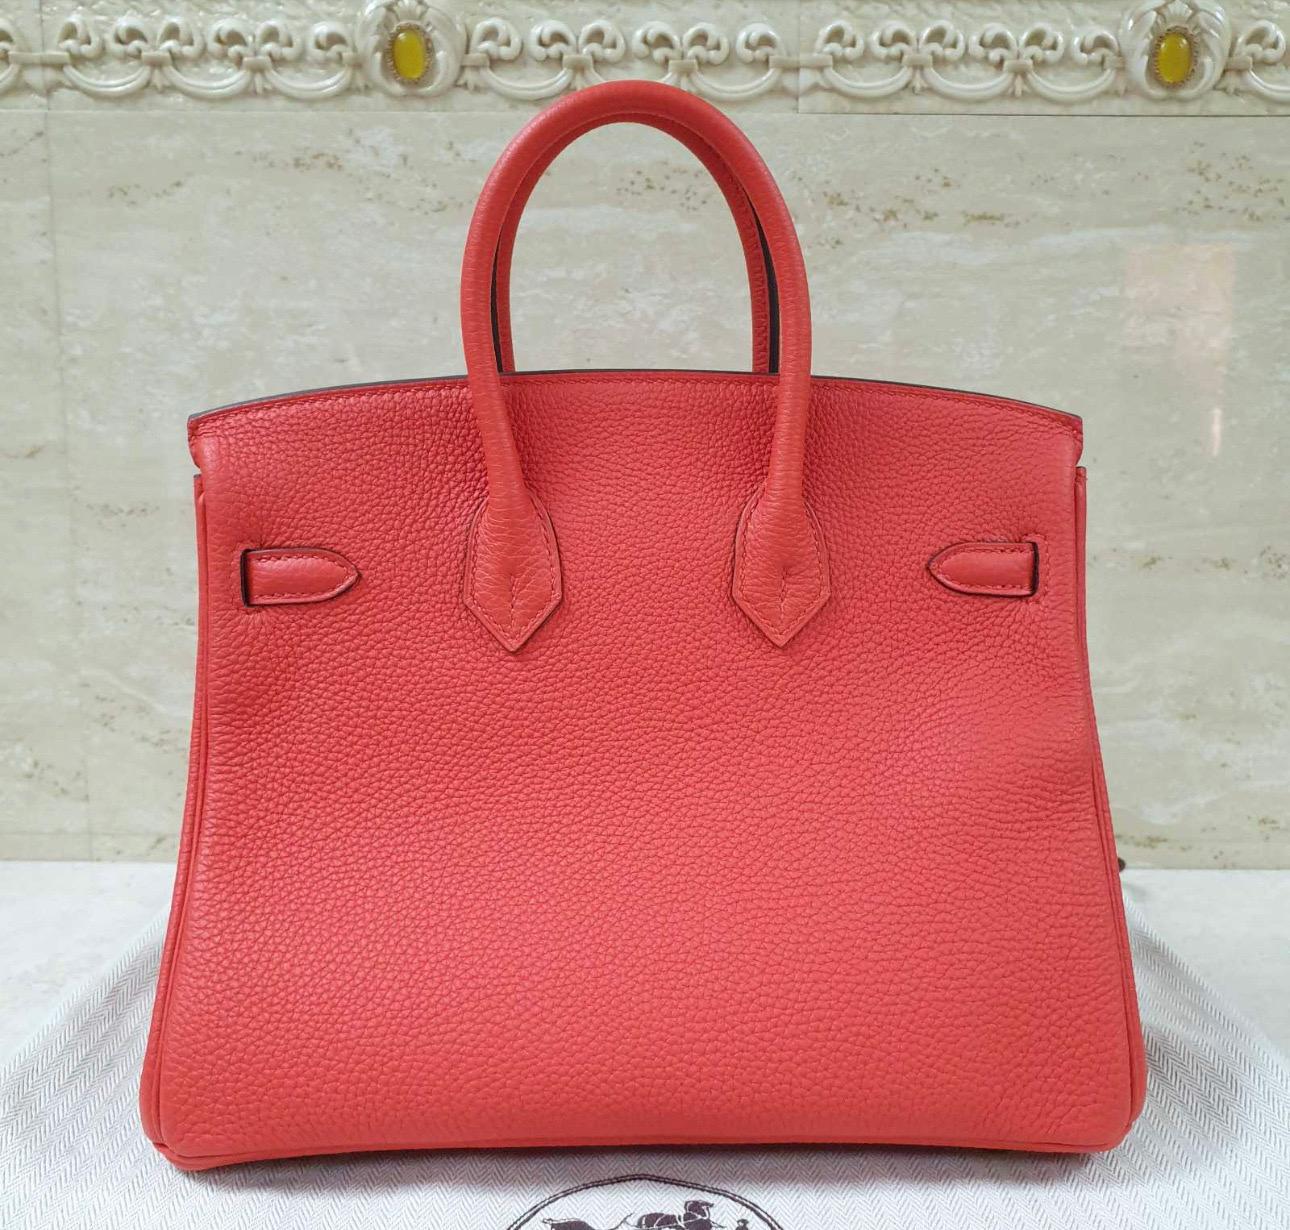 Model: Birkin

Size: 25 cm

Color: Capucine


HW: Gold Plated

Year: 2020 Y


Never worn.


Comes with a dust bag. No receipt.

Bababebi certificate is included.